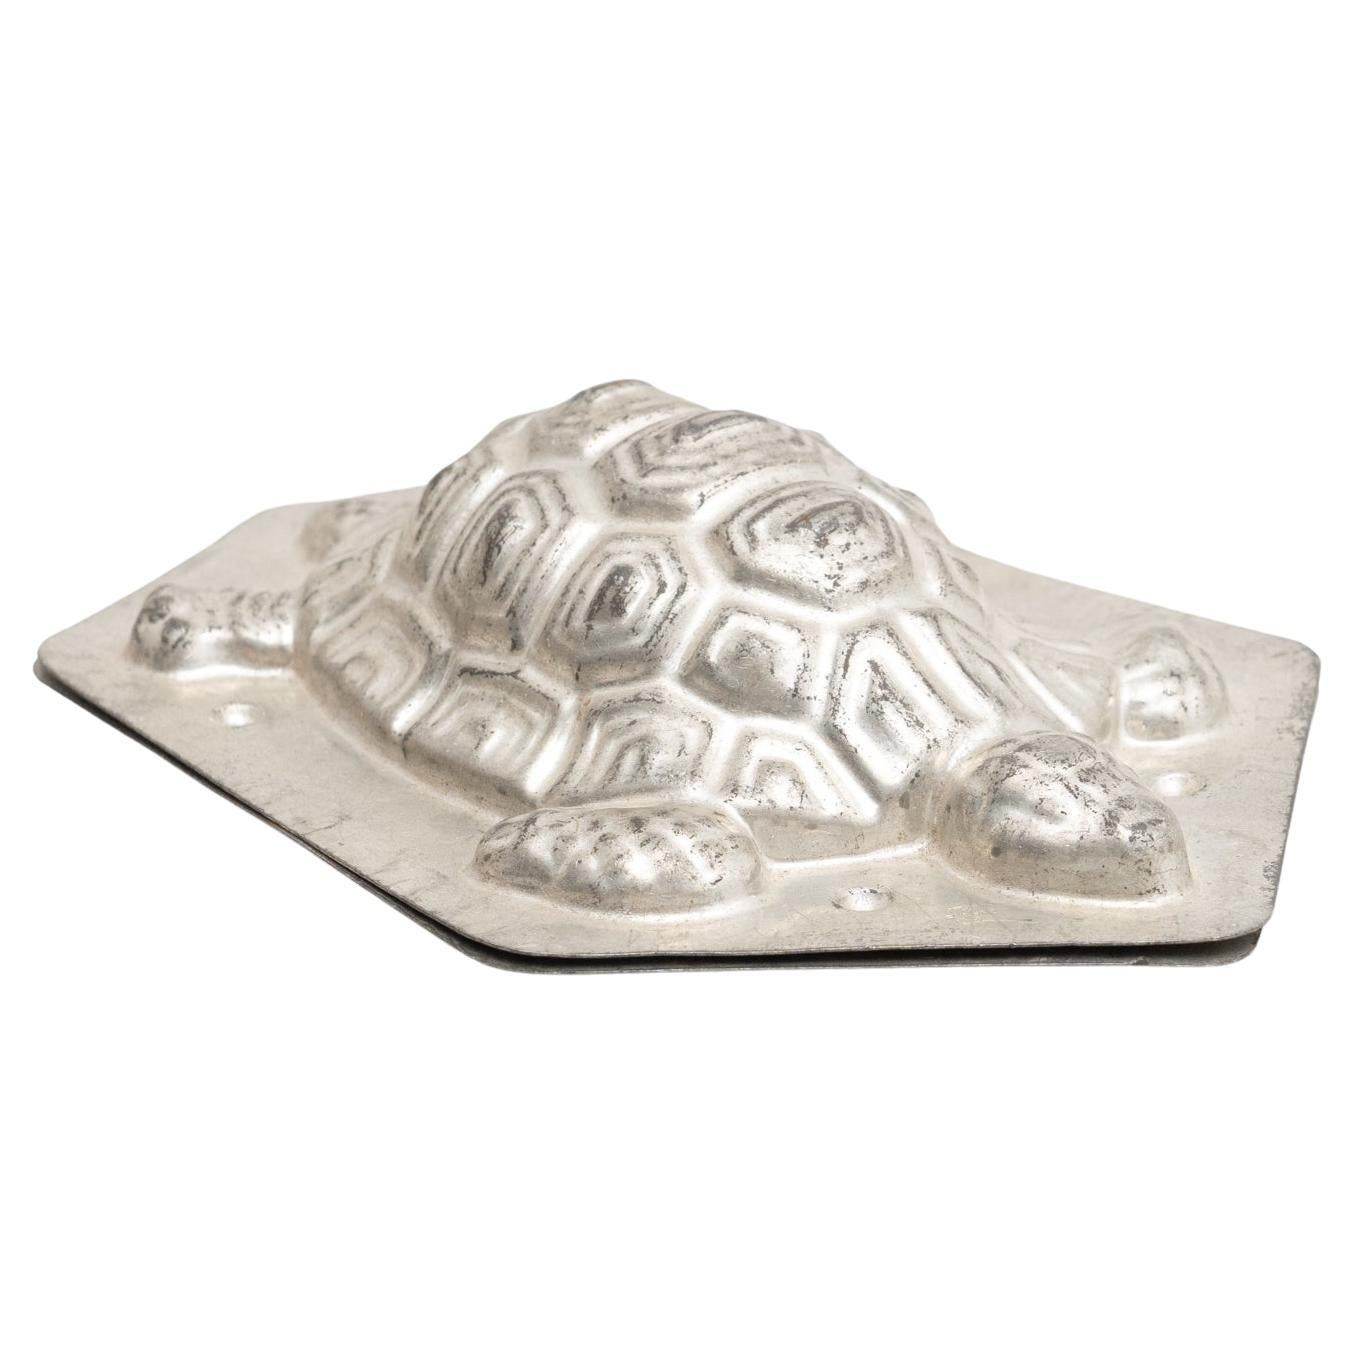 Antique Turtle Shaped Metal Cooking Mold, circa 1950 For Sale